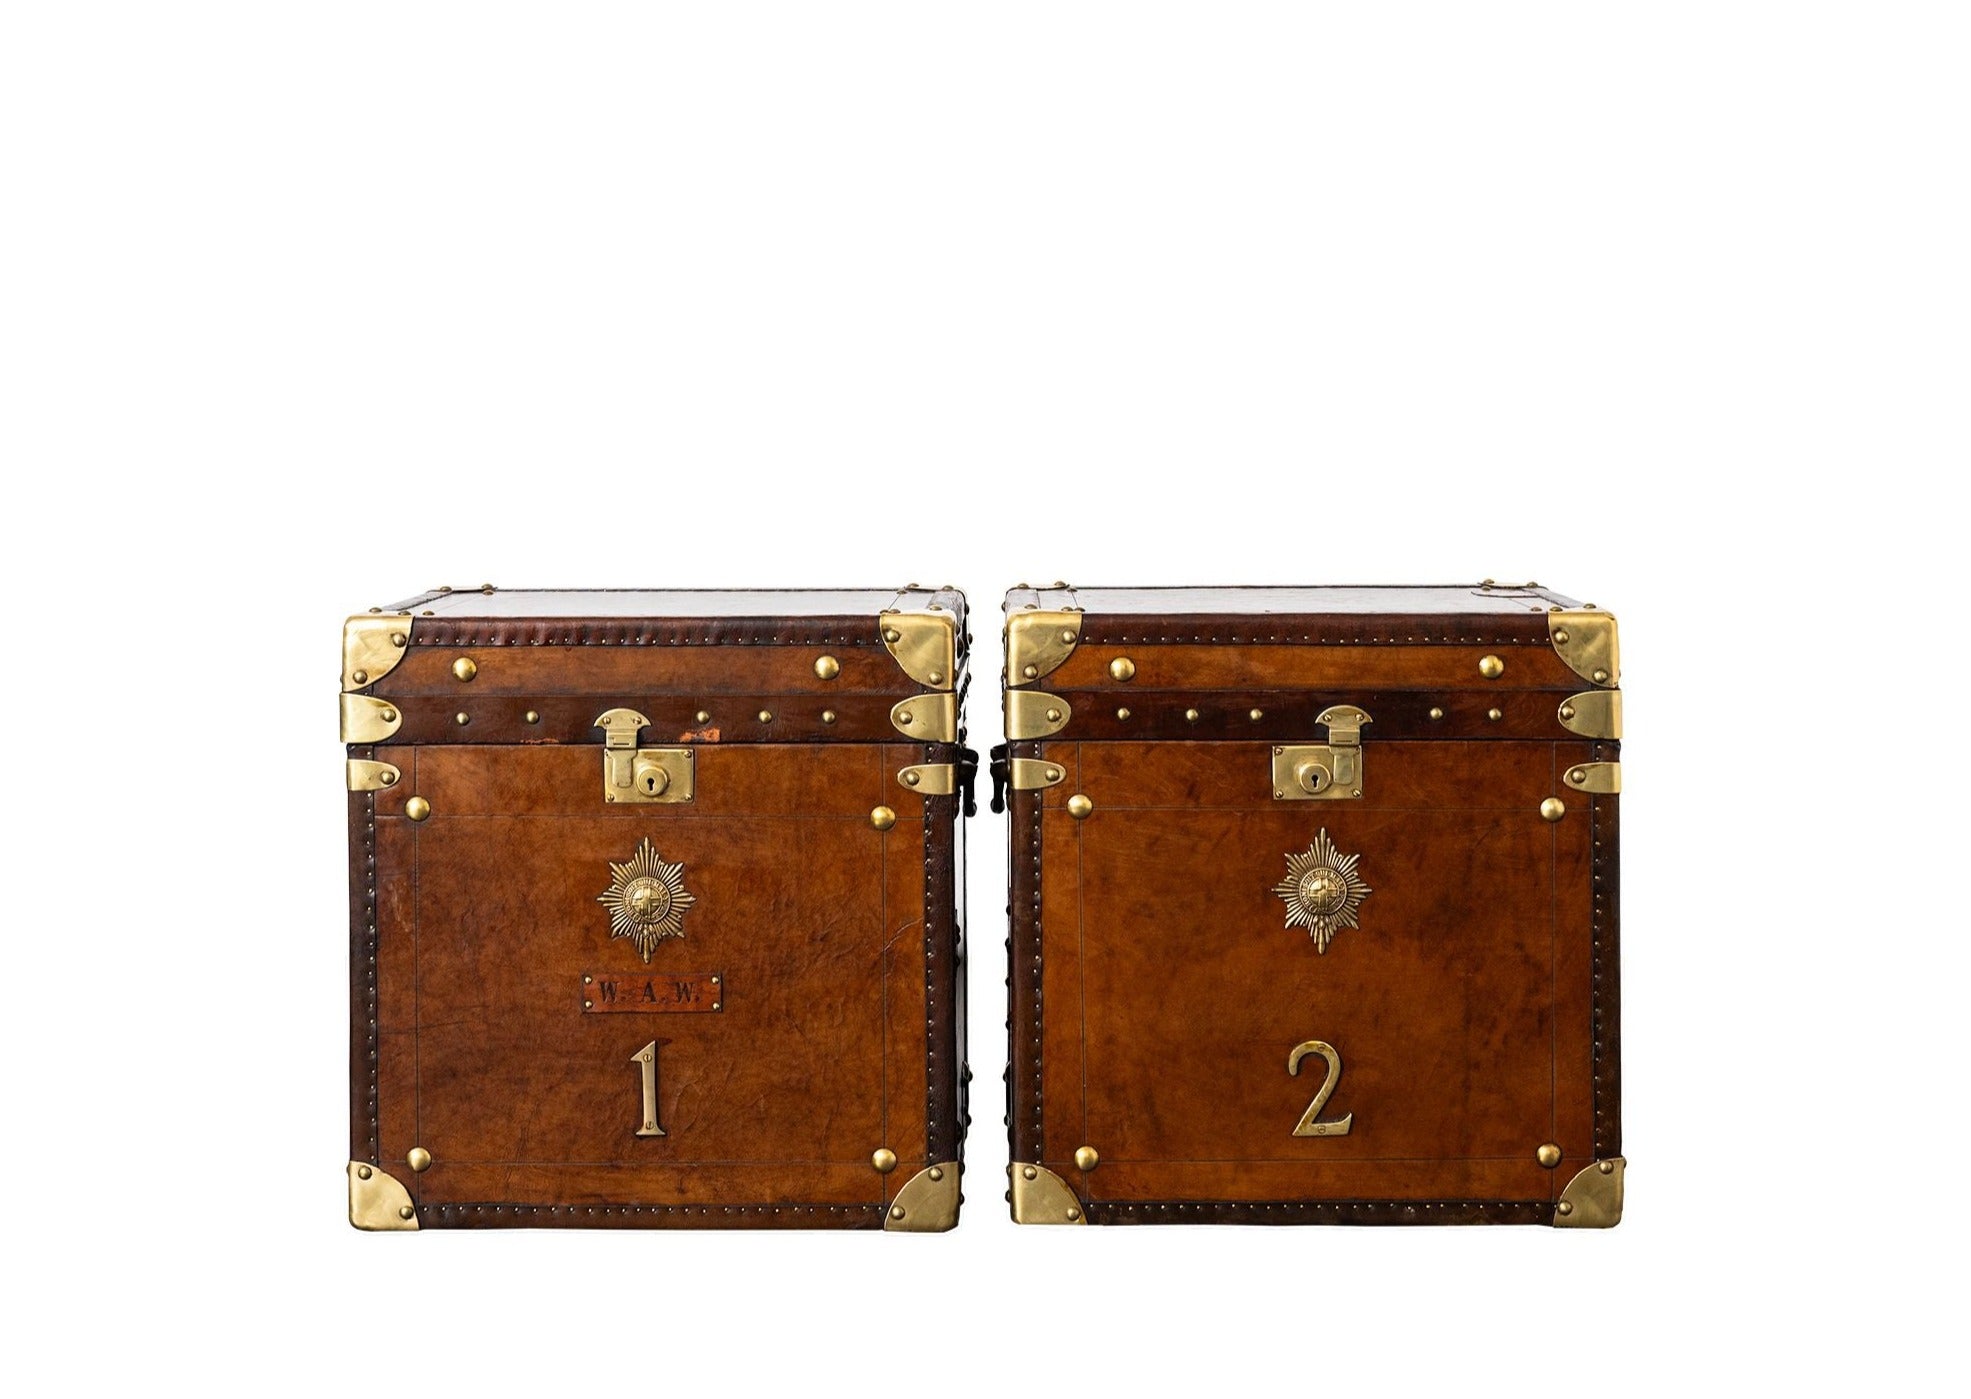 Vintage Military Trunk set from WW II.  